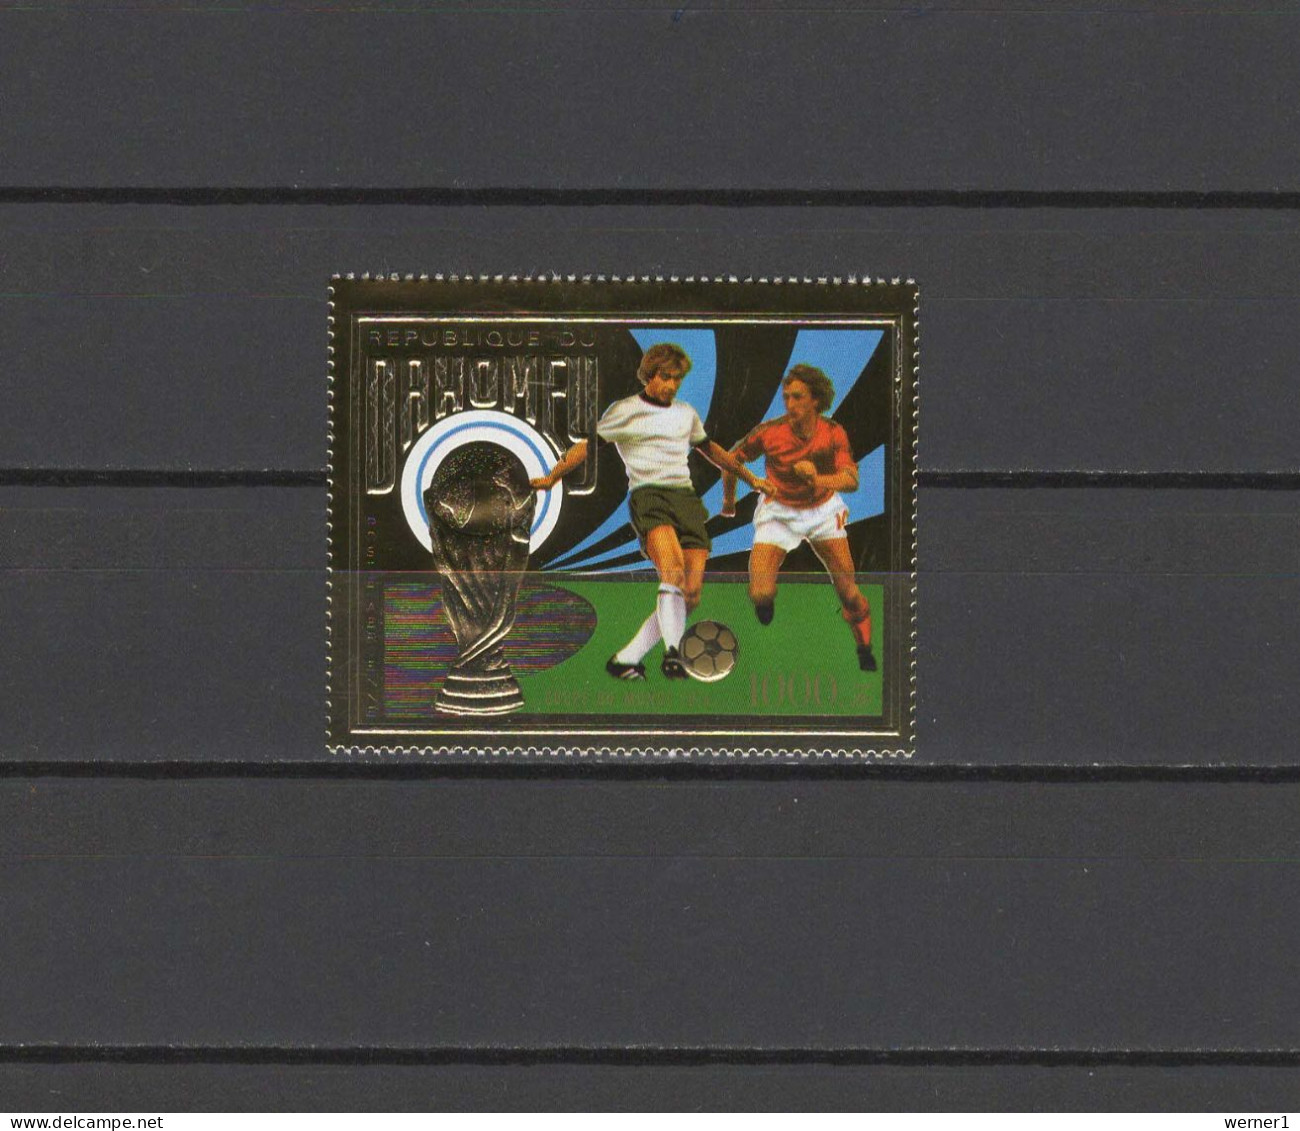 Dahomey 1974 Football Soccer World Cup Gold Stamp MNH - 1974 – West Germany